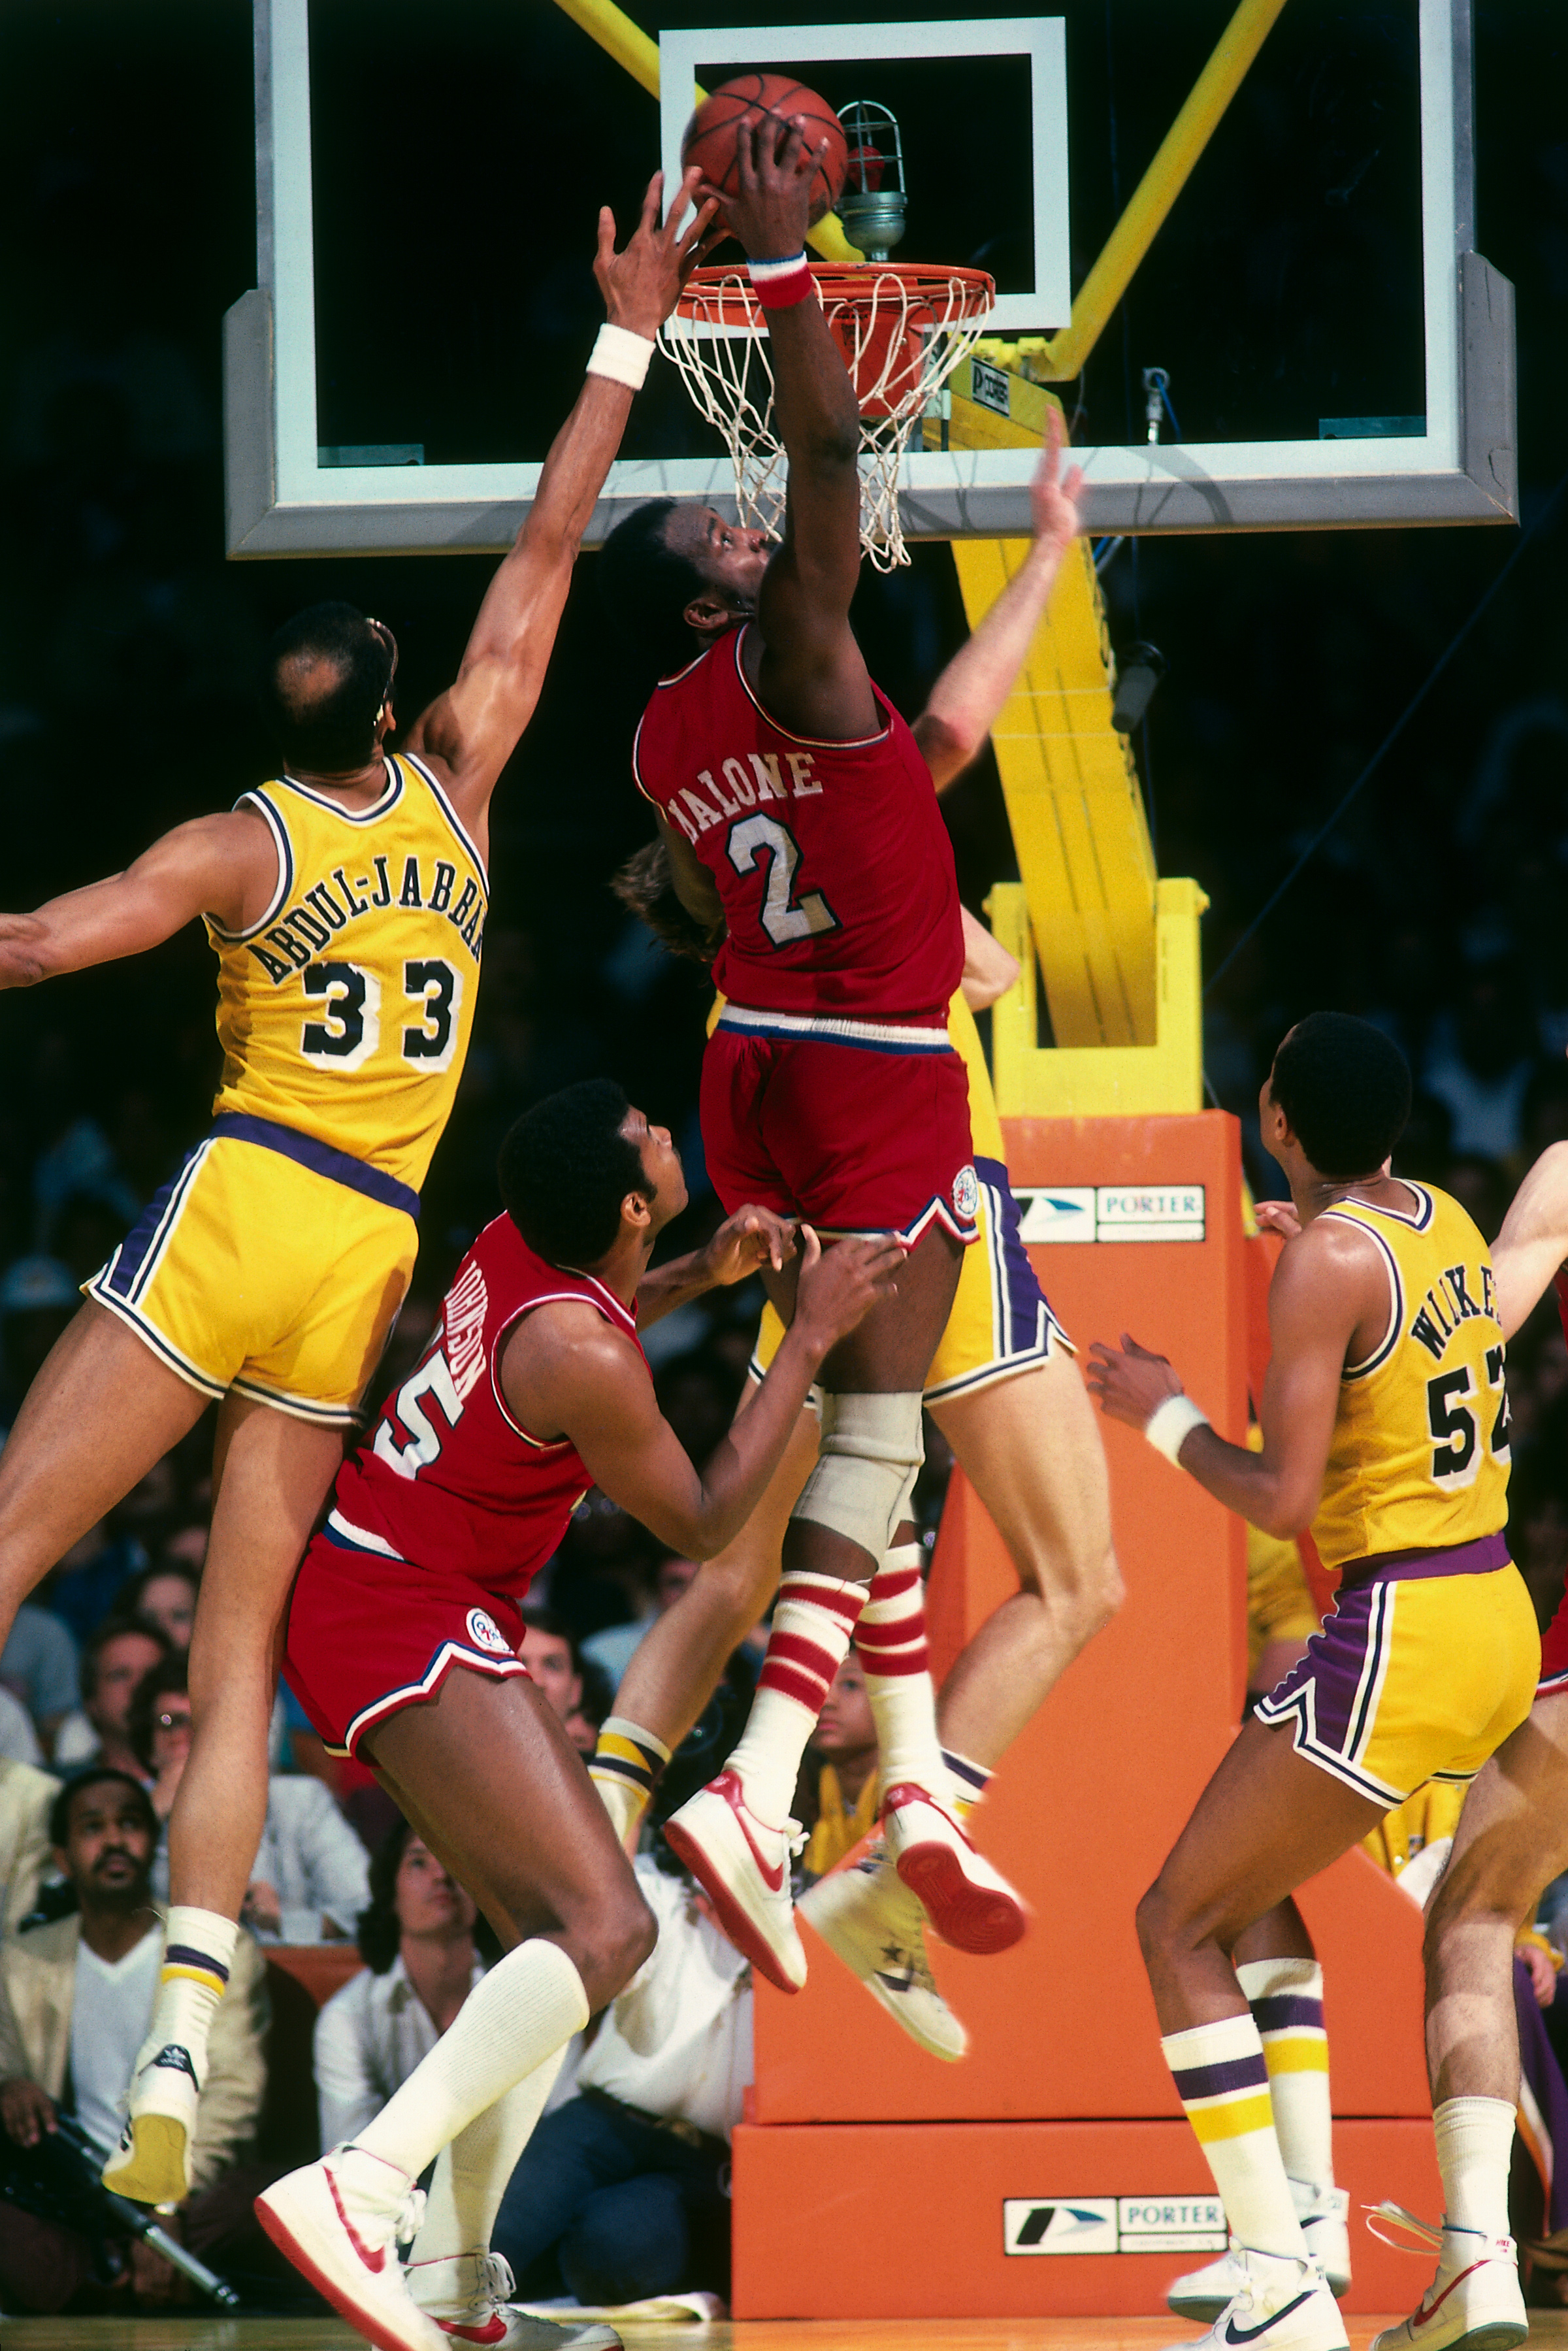 Moses Malone Was Easy to Overlook but Undeniably Great - The New York Times